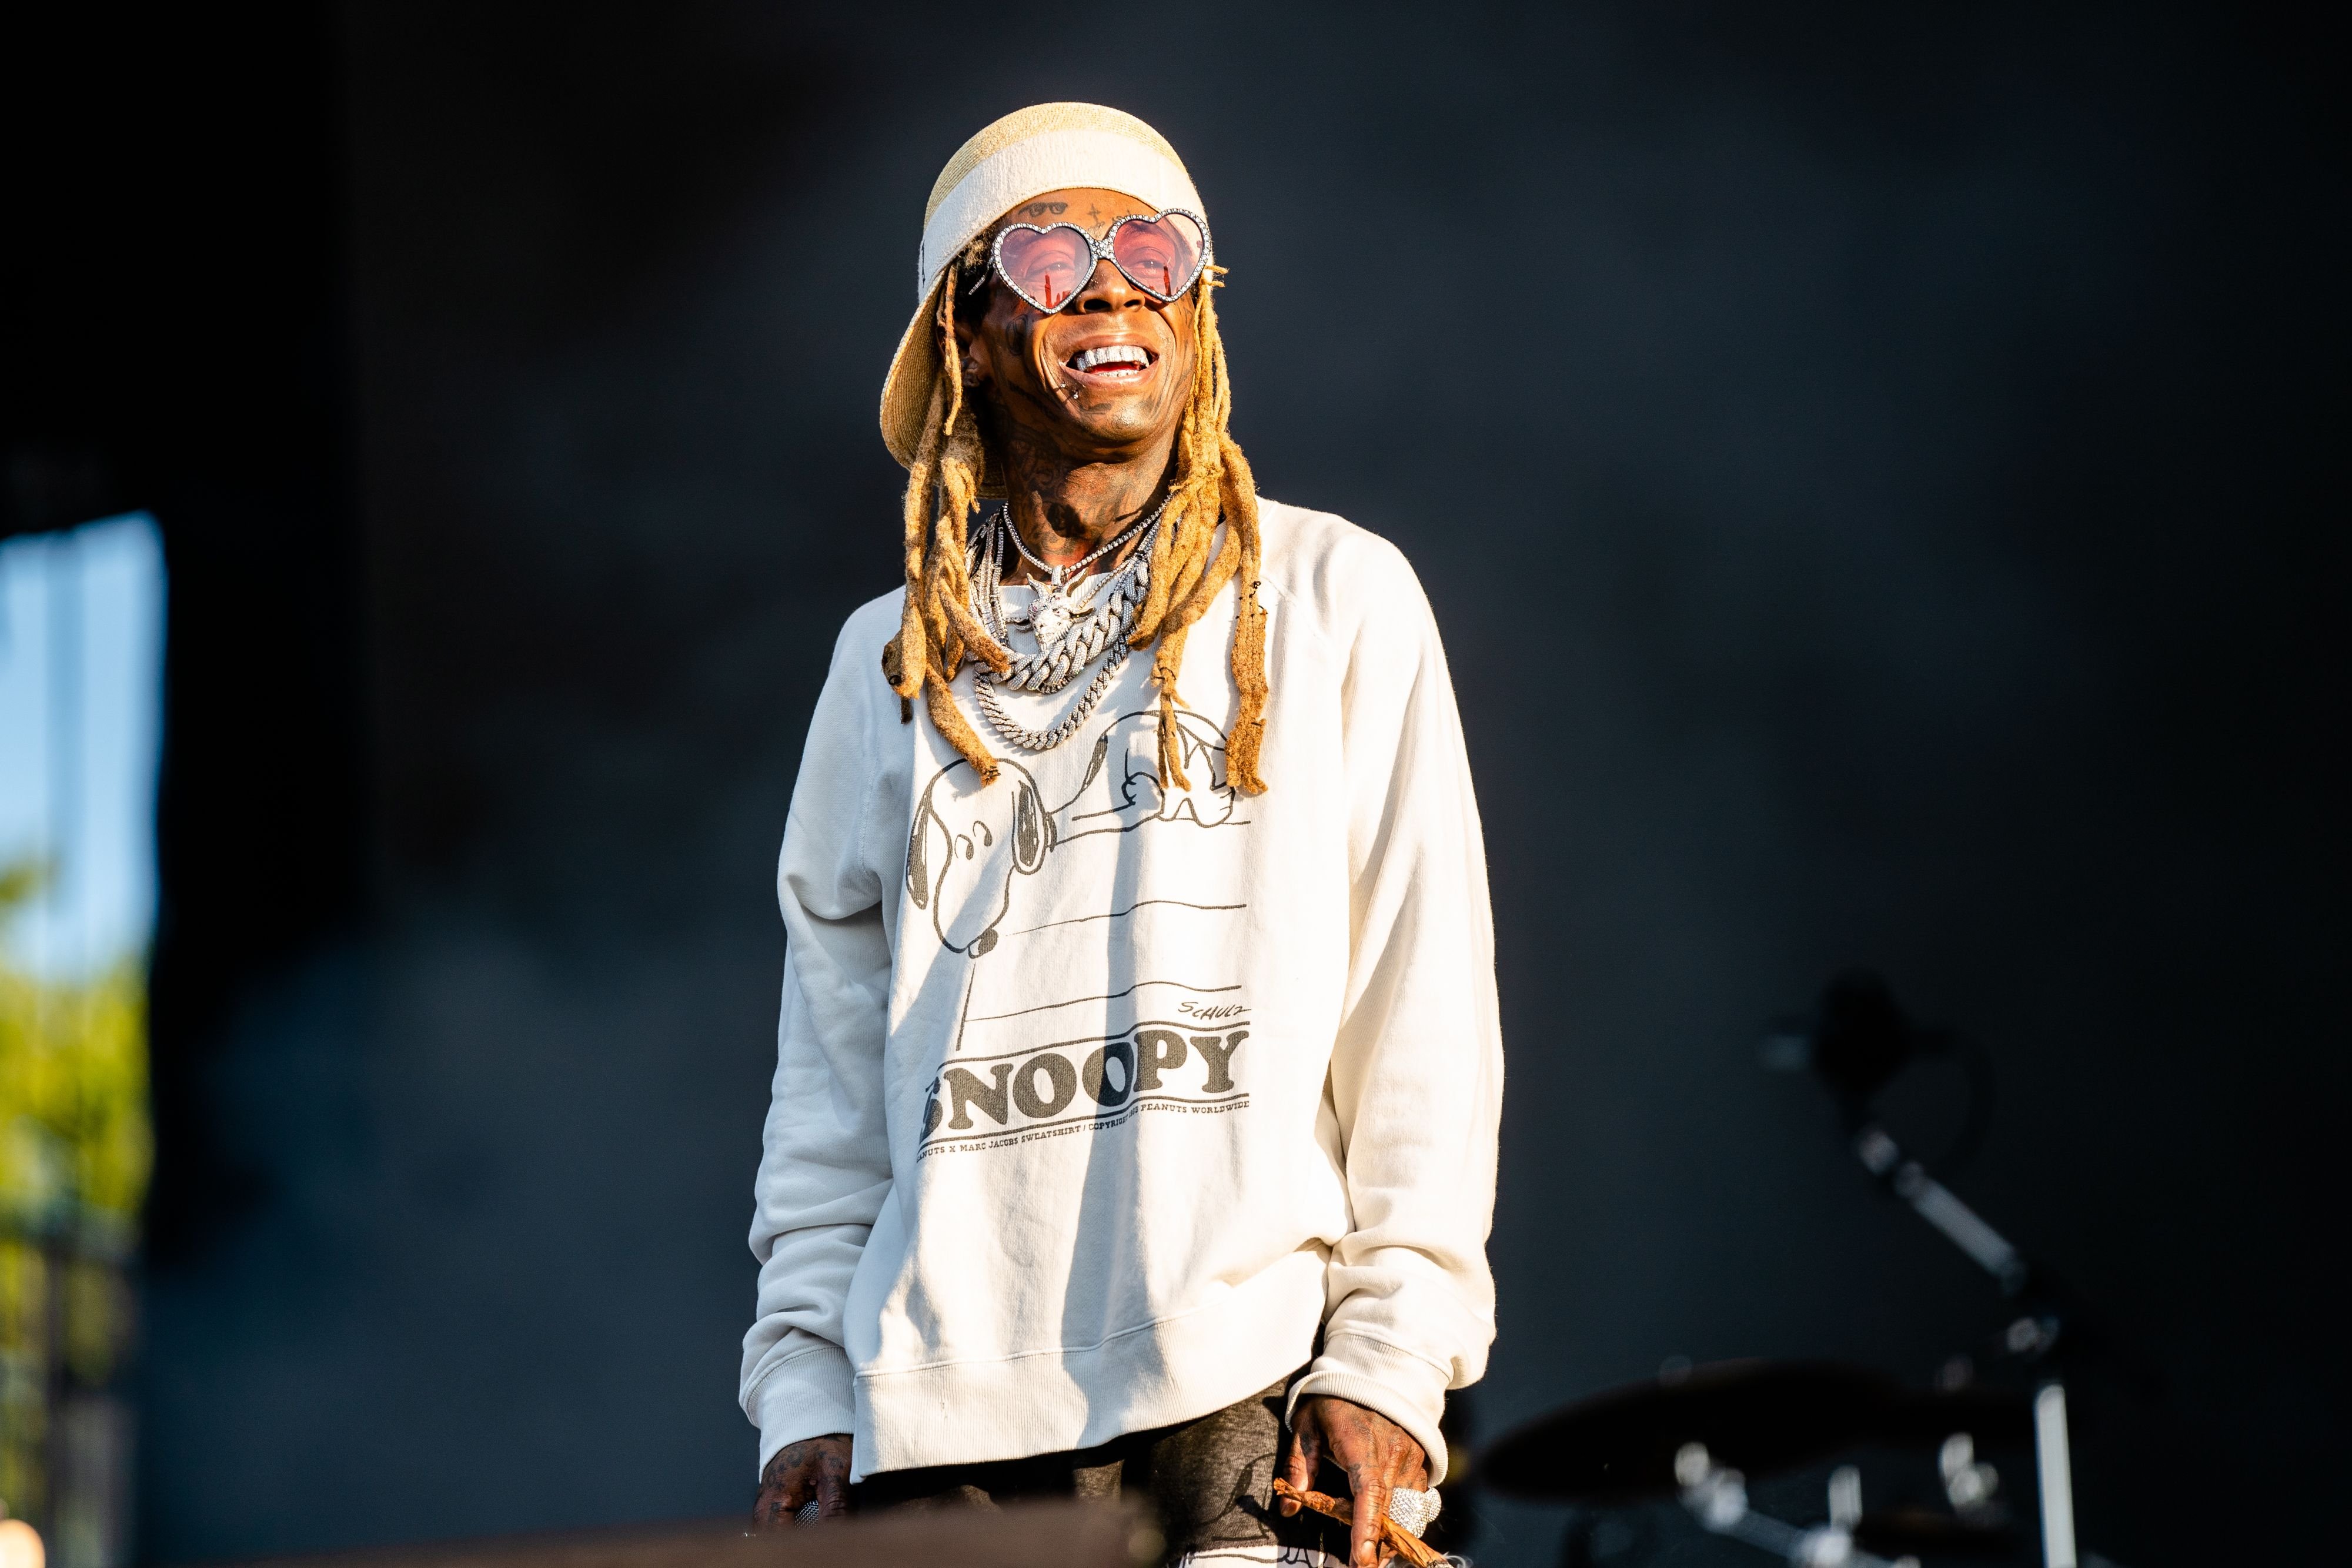 Lil Wayne performs at the Lollapalooza Music Festival at Grant Park on August 03, 2019. | Photo: Getty Images